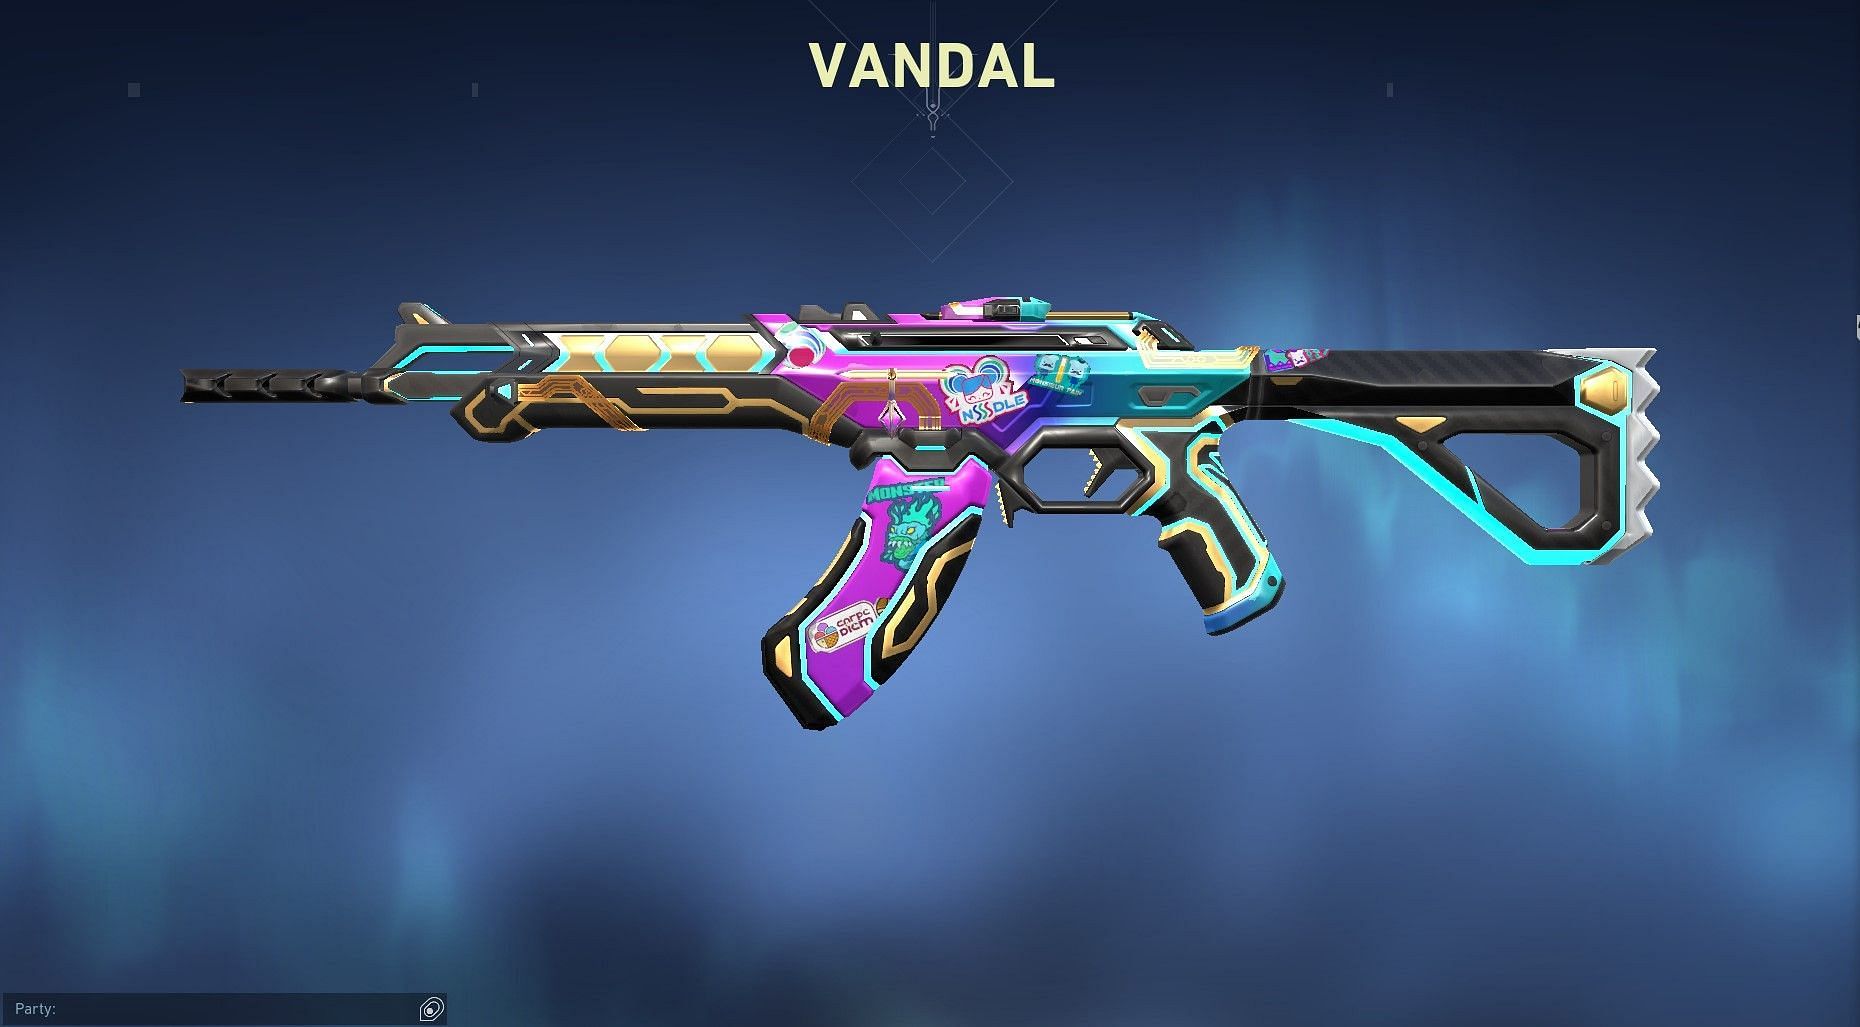 Gltchpop Vandal can be bought for 2175 VP (Image via Valorant)